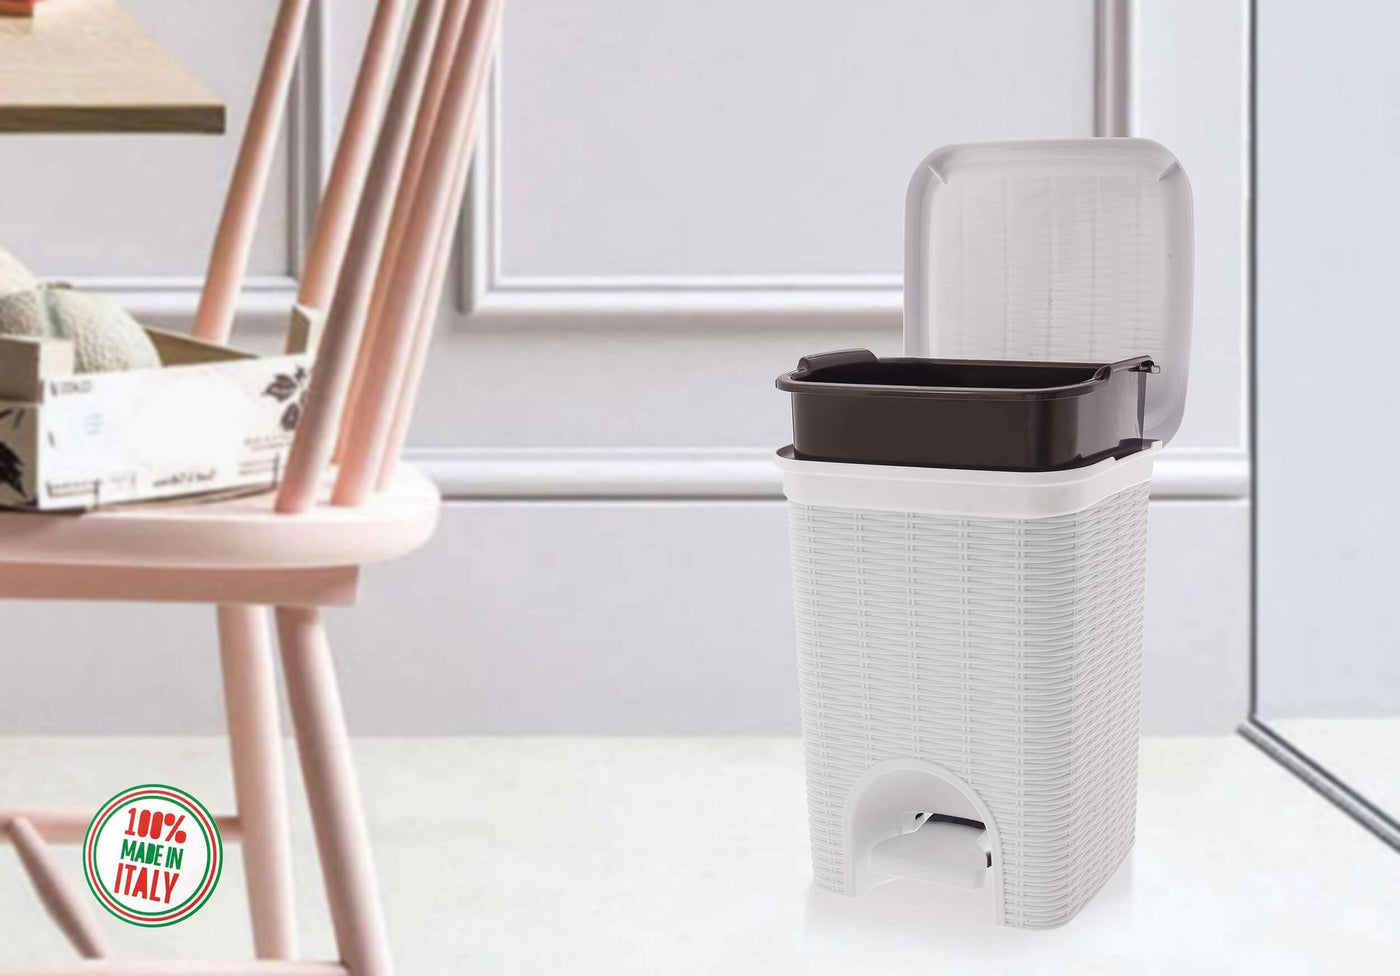 Elegance - White 6 Litre Pedal Dustbin with Plastic Bucket Inside for Home, Kitchen, Office use